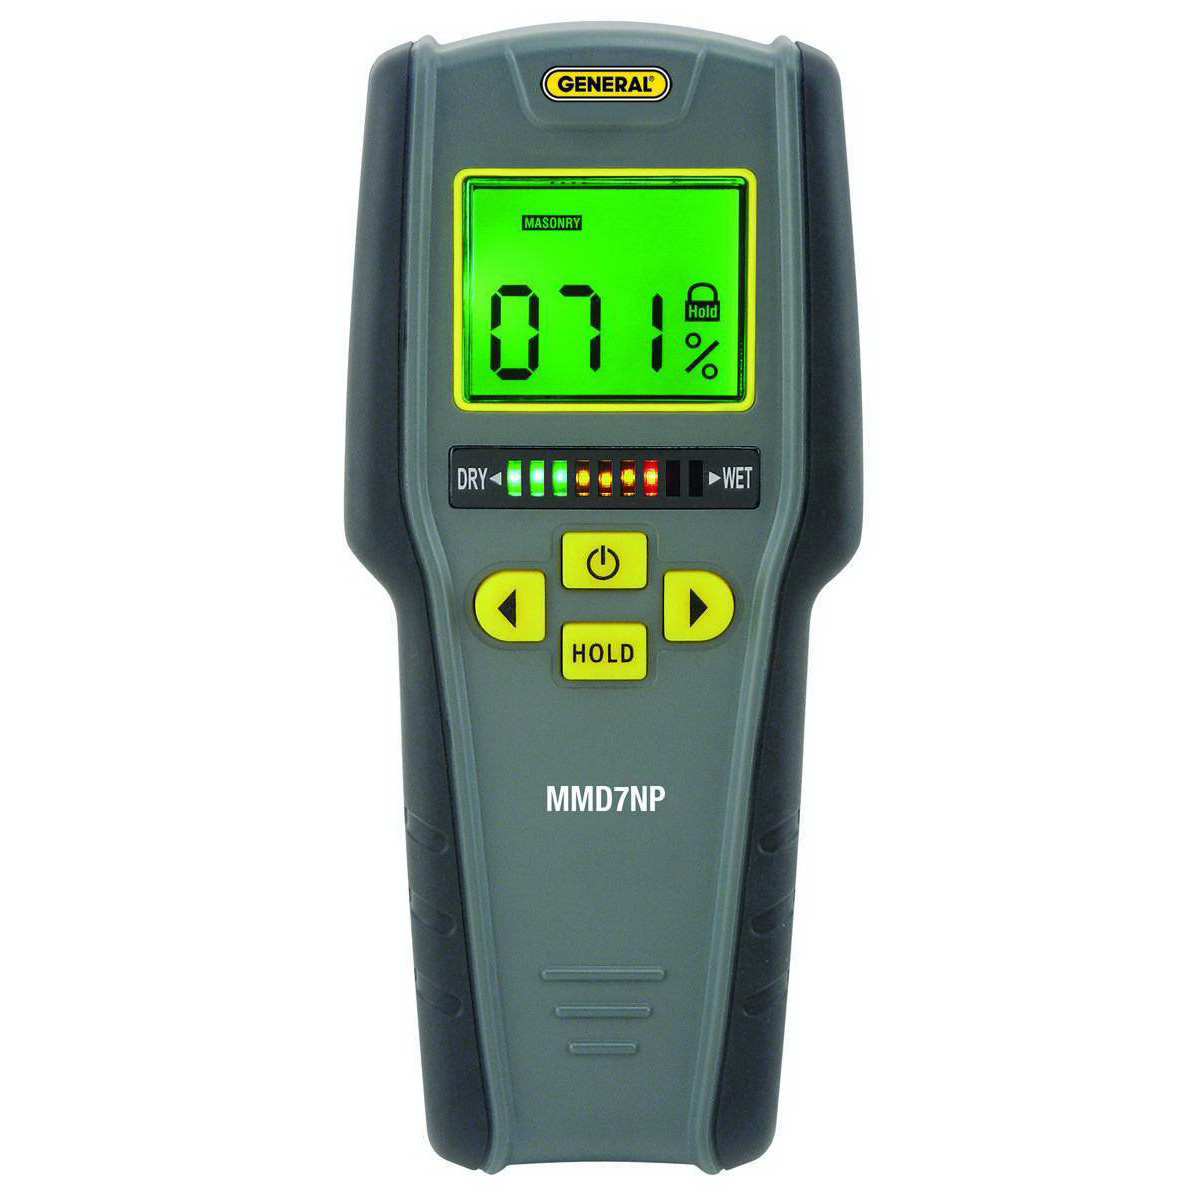 GENERAL MMD7NP Moisture Meter, 0 to 53% Softwood, 0 to 35% Hardwood, +/-4 % Accuracy, LCD Display - 1